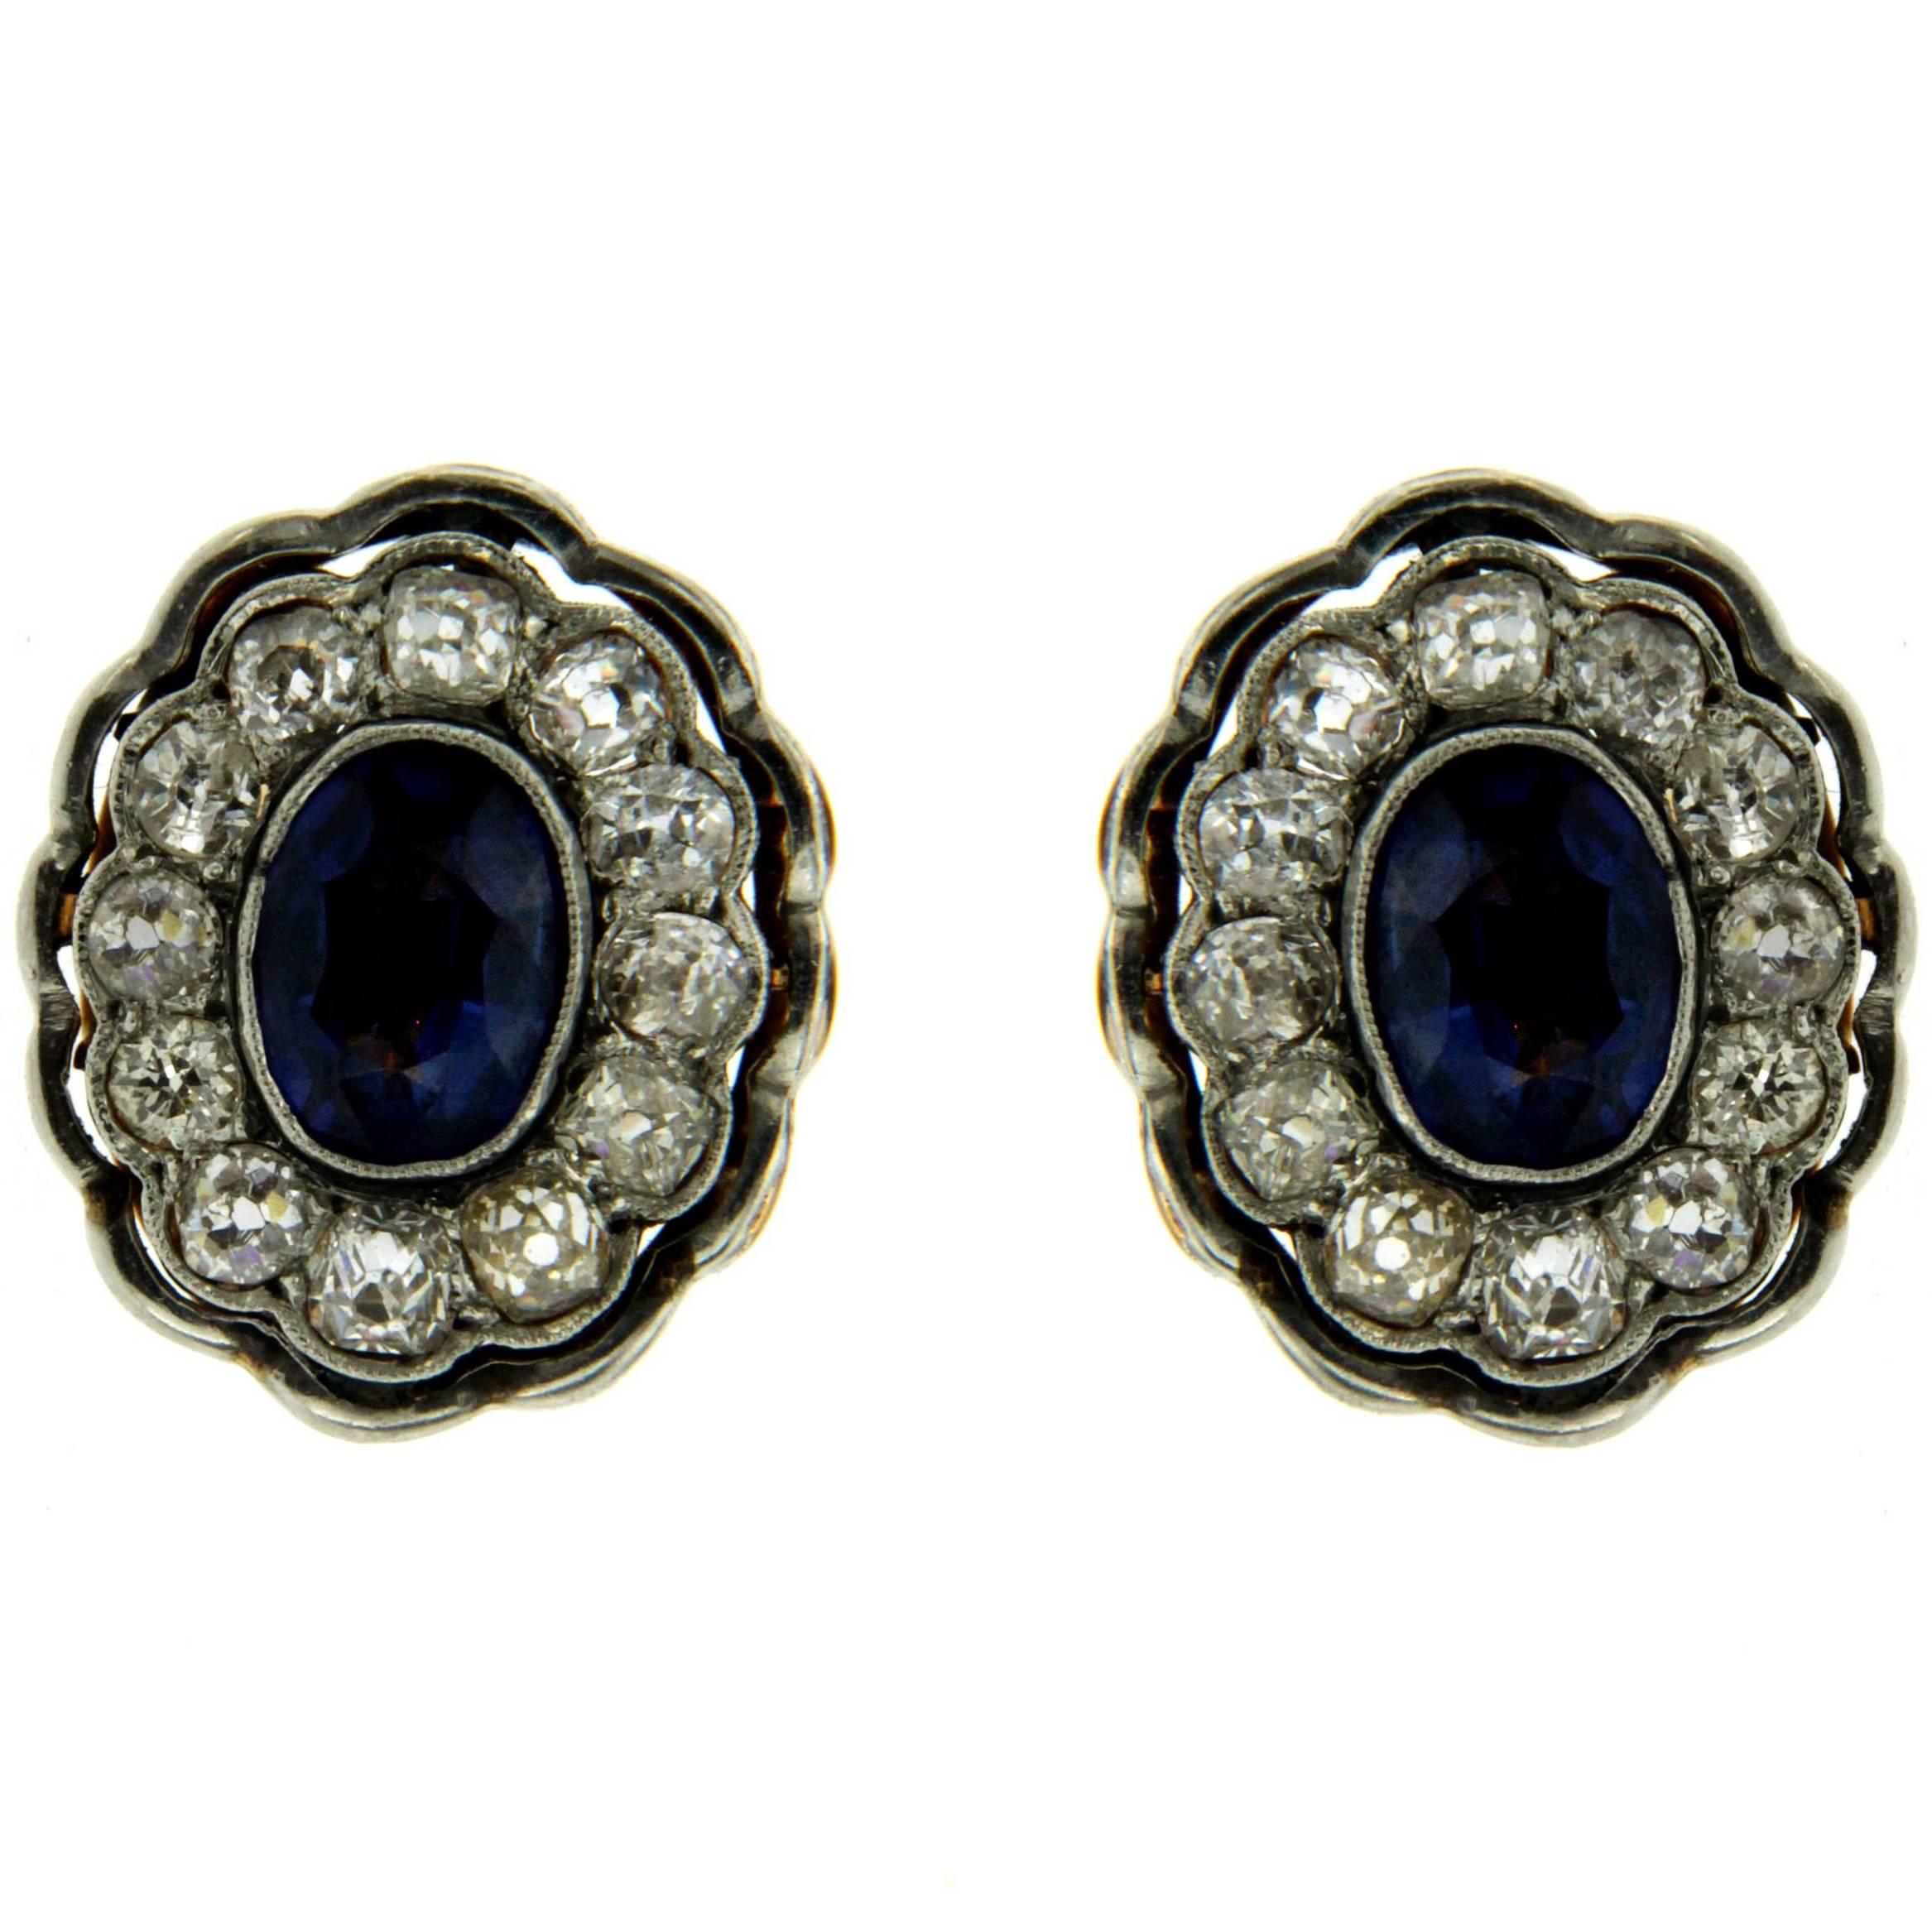 Victorian Sapphire and Diamond Cluster Earrings